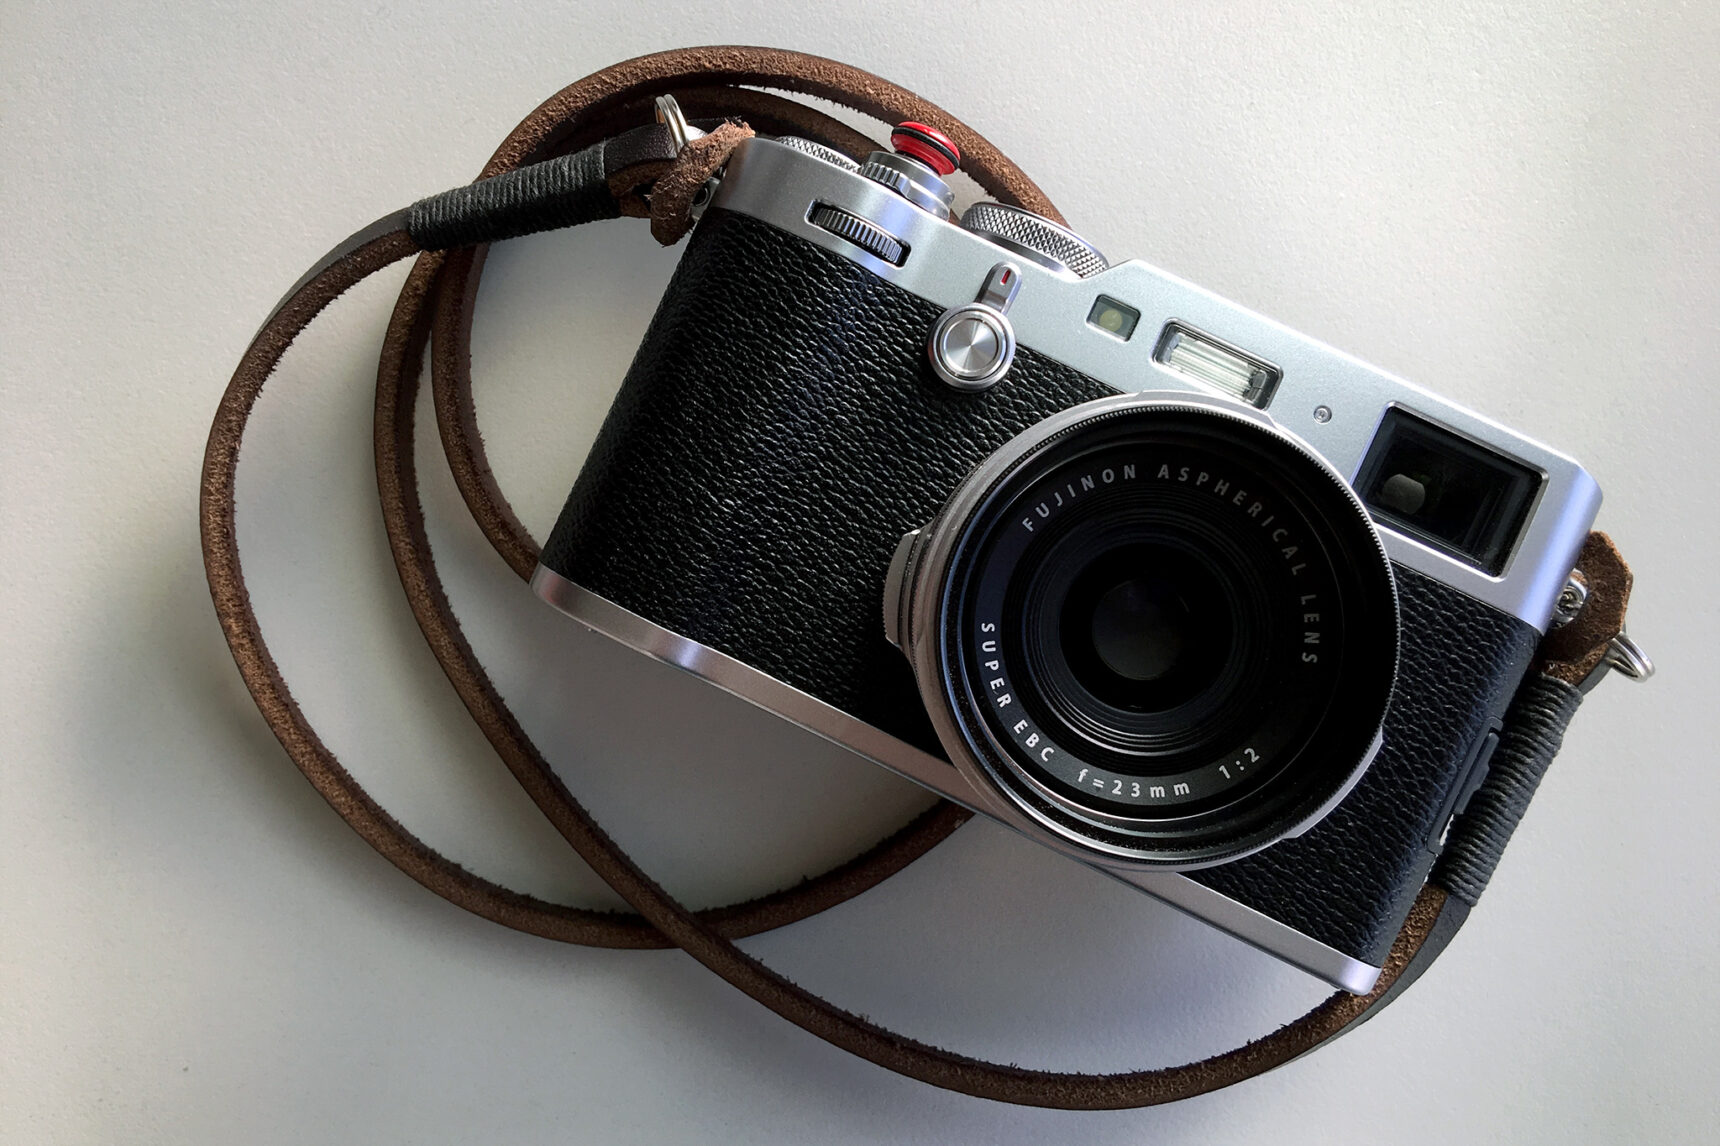 Fuji X100F Street Photography Review - New Features